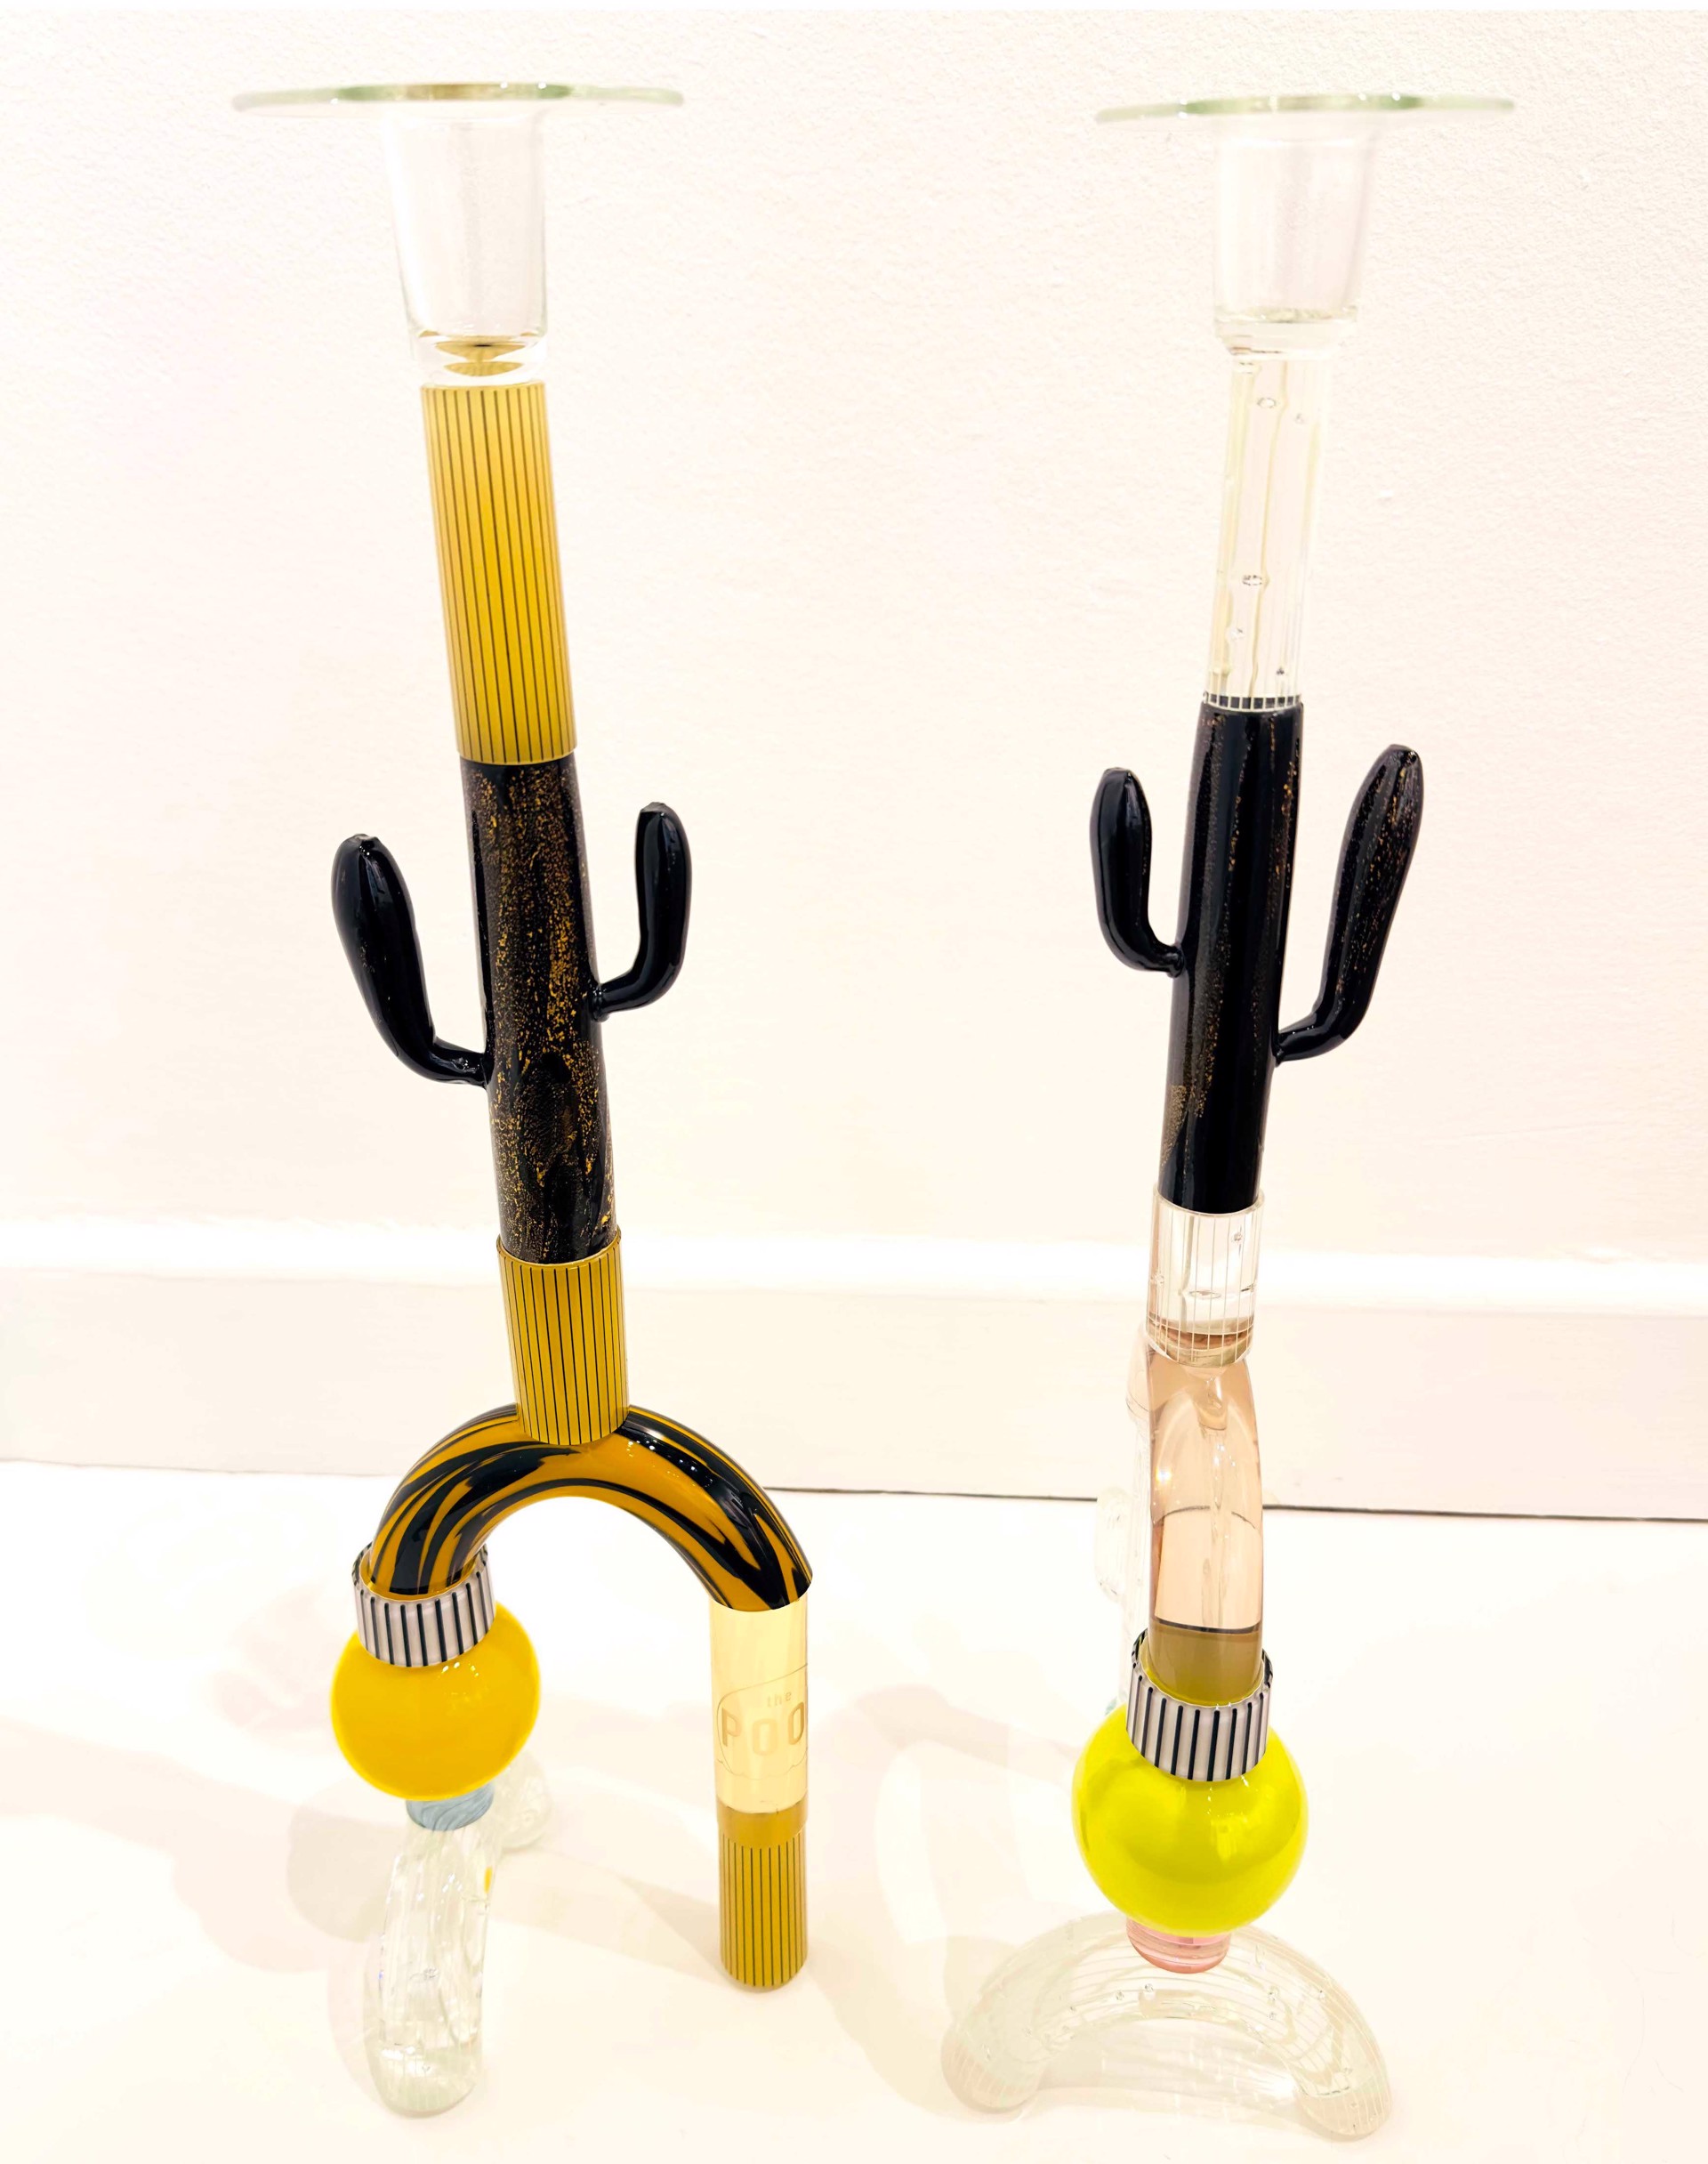 Large Cactus Candlestick Holders Set- The Pool Glassworks by Christopher Kerr-Ayer